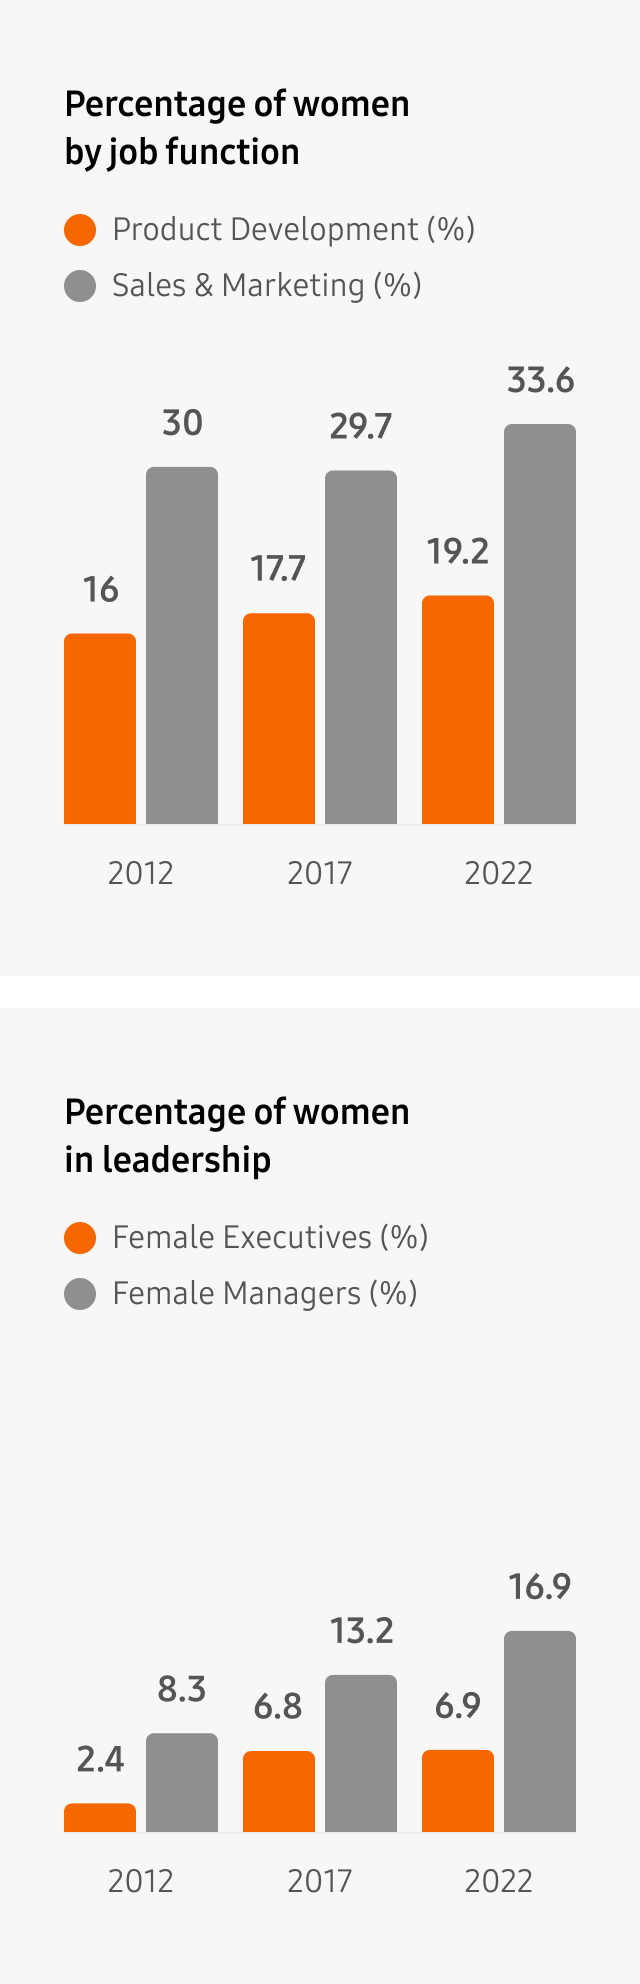 Percentage of women by job function: 2011 - Product Development: 15% Sale and marketing: 28%, Percentage of women in leadership: 2011 - Executive: 1.5% Manager: 9%